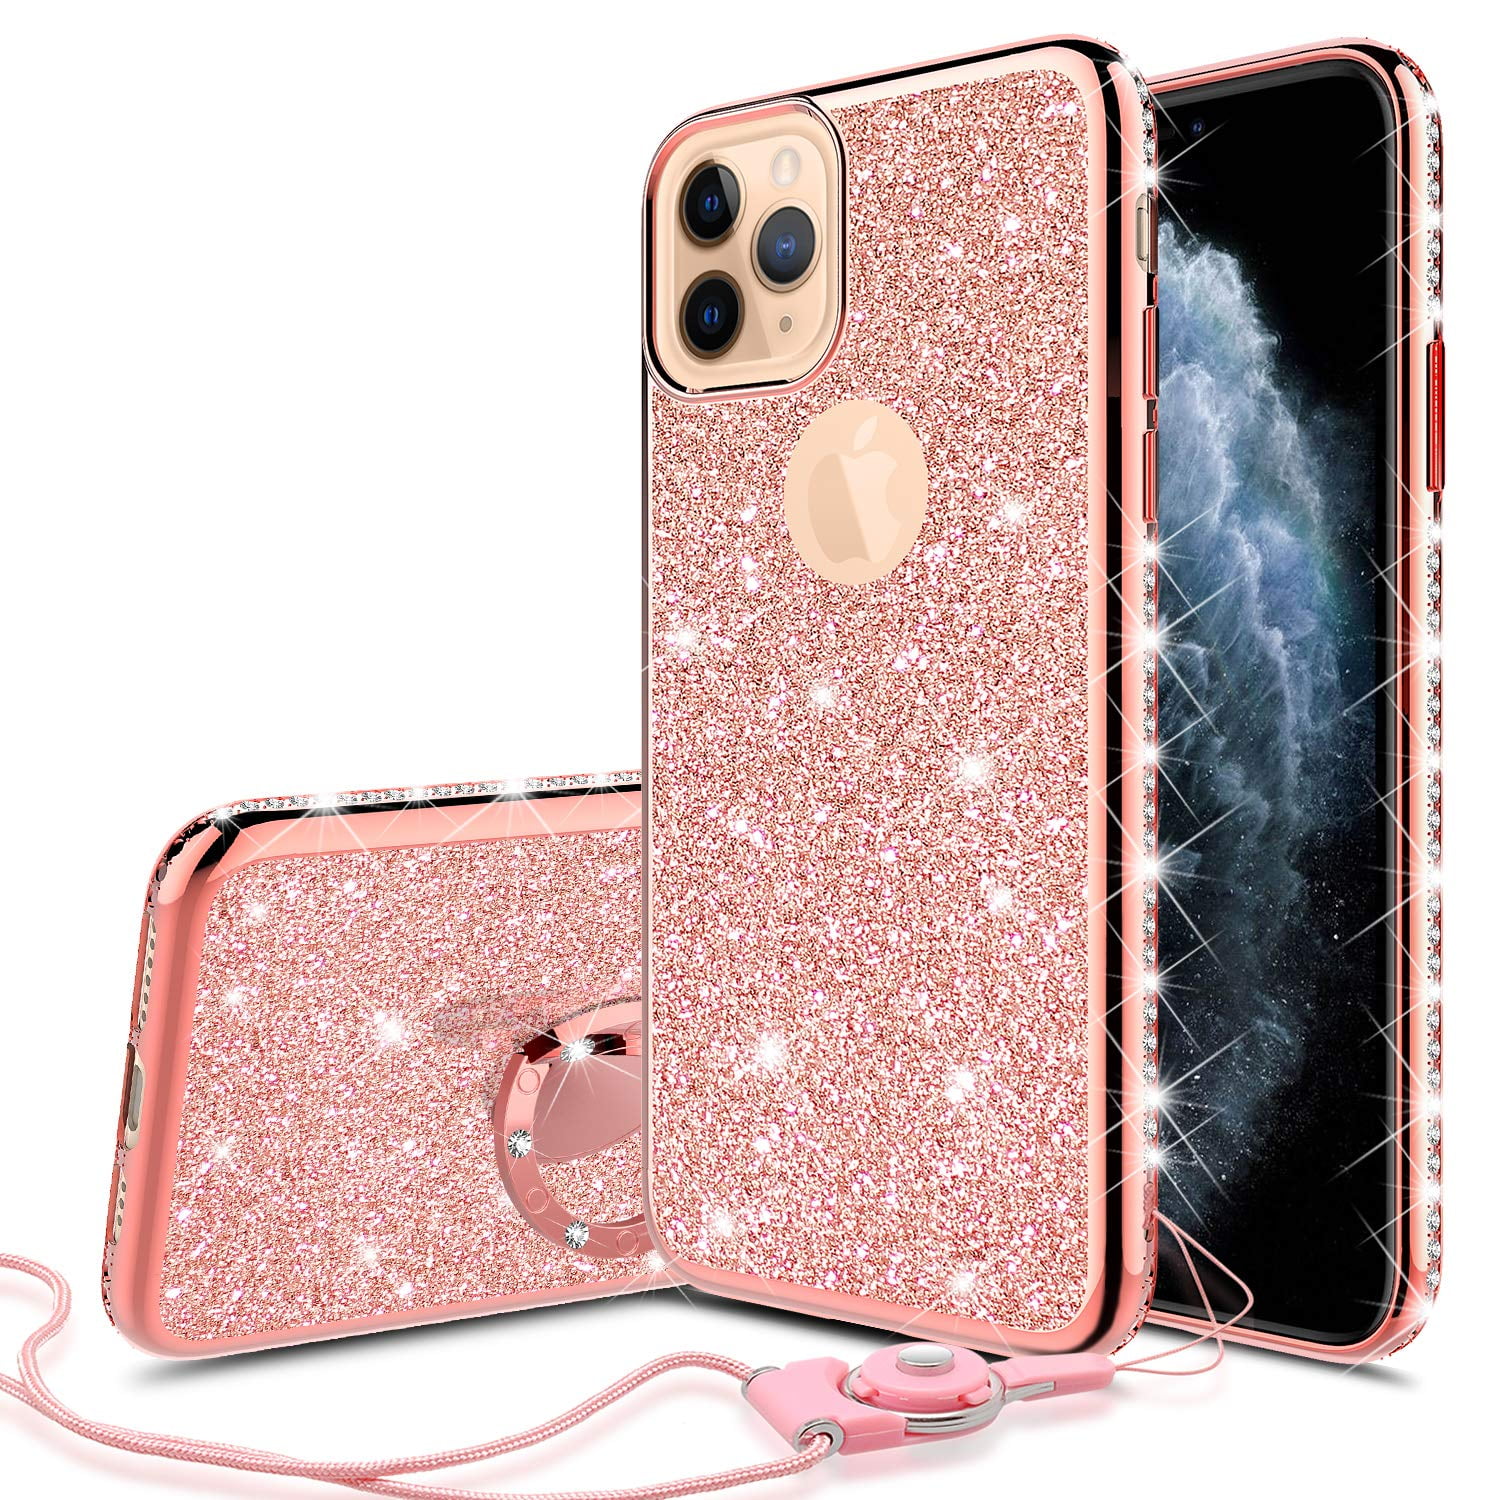 Glitter Cute Phone Case Girls Kickstand For Apple Iphone 11 Pro Max Case Bling Diamond Rhinestone Bumper Ring Stand Thin Soft Sparkly Case For Iphone 11 Pro Max Rose Gold Walmart Com